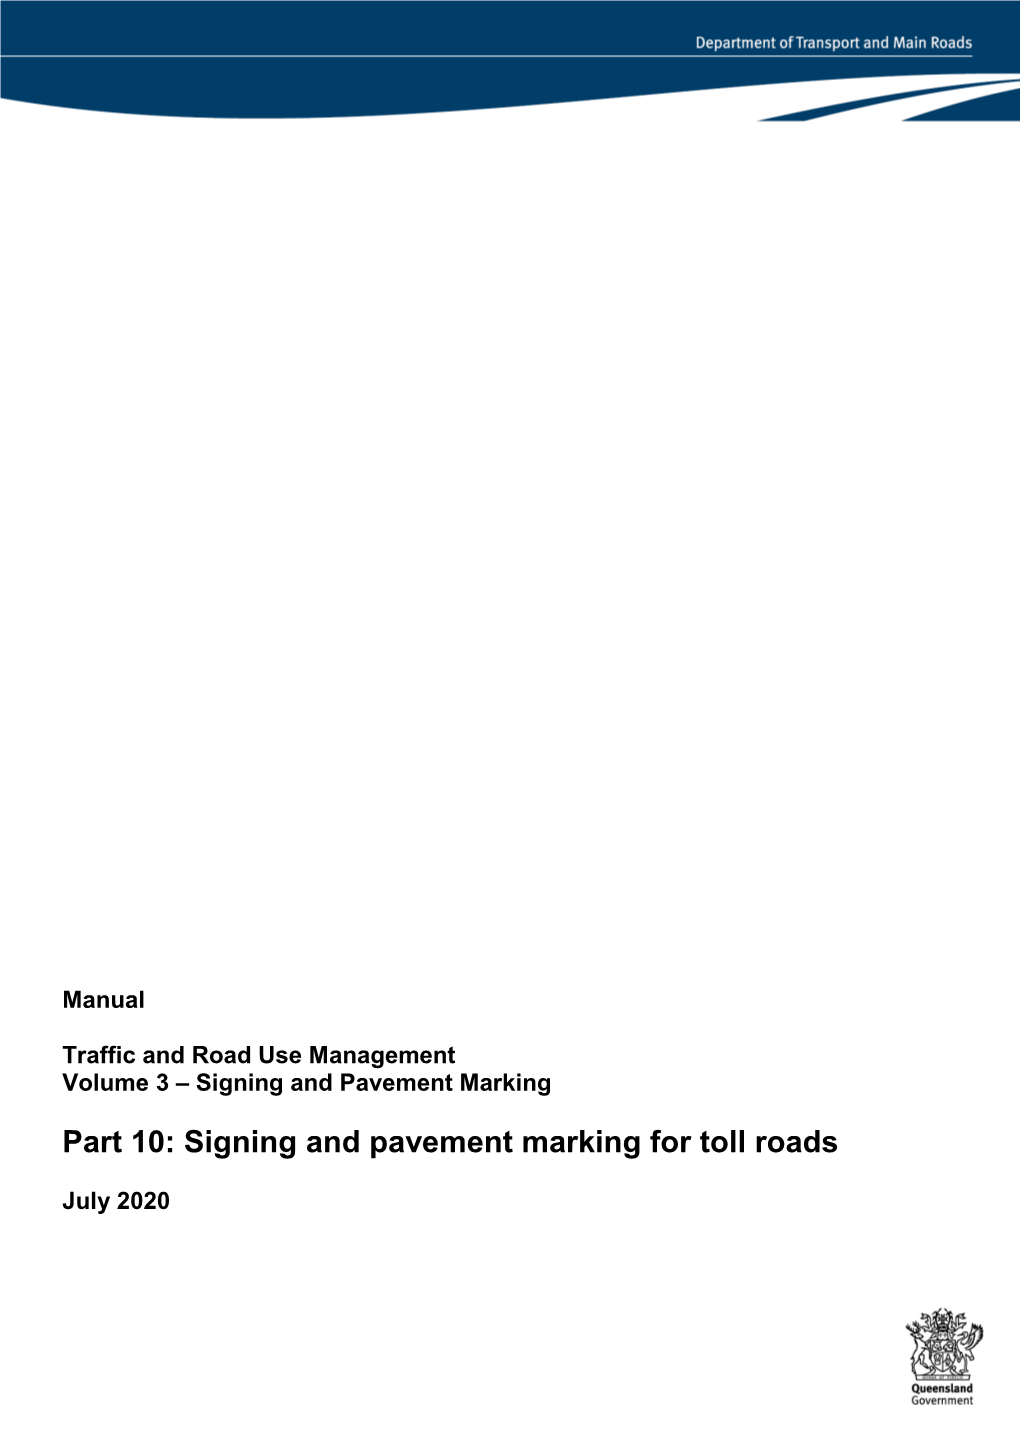 Part 10: Signing and Pavement Marking for Toll Roads